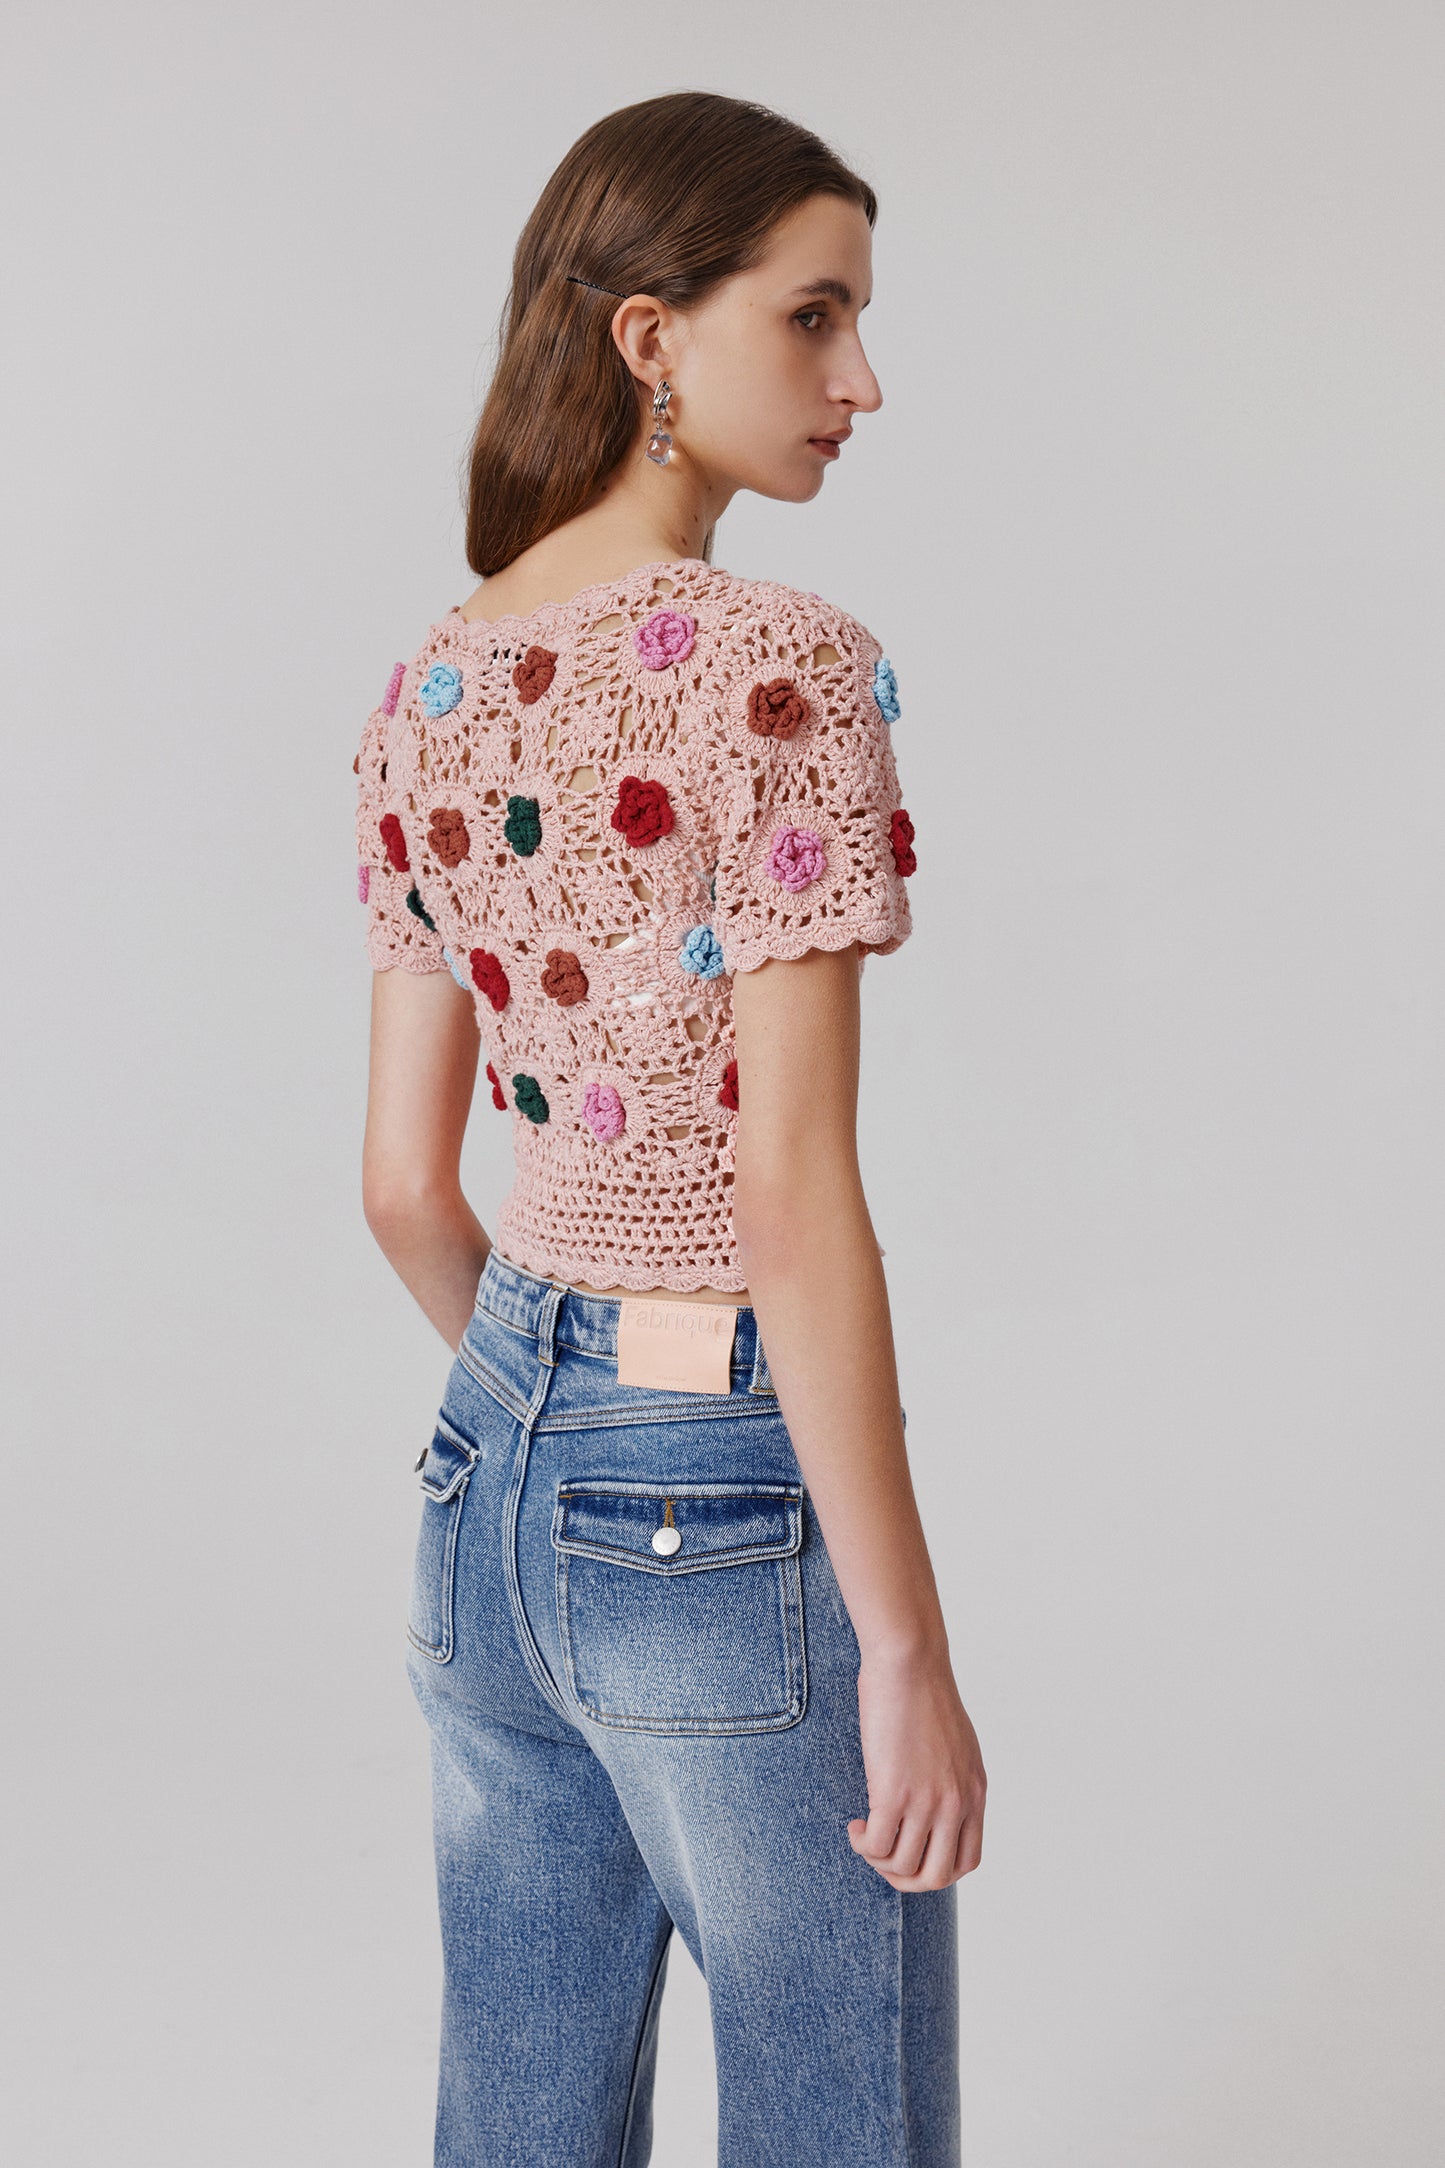 Alice Handcrafted Crochet Flower Knit Top in Cotton